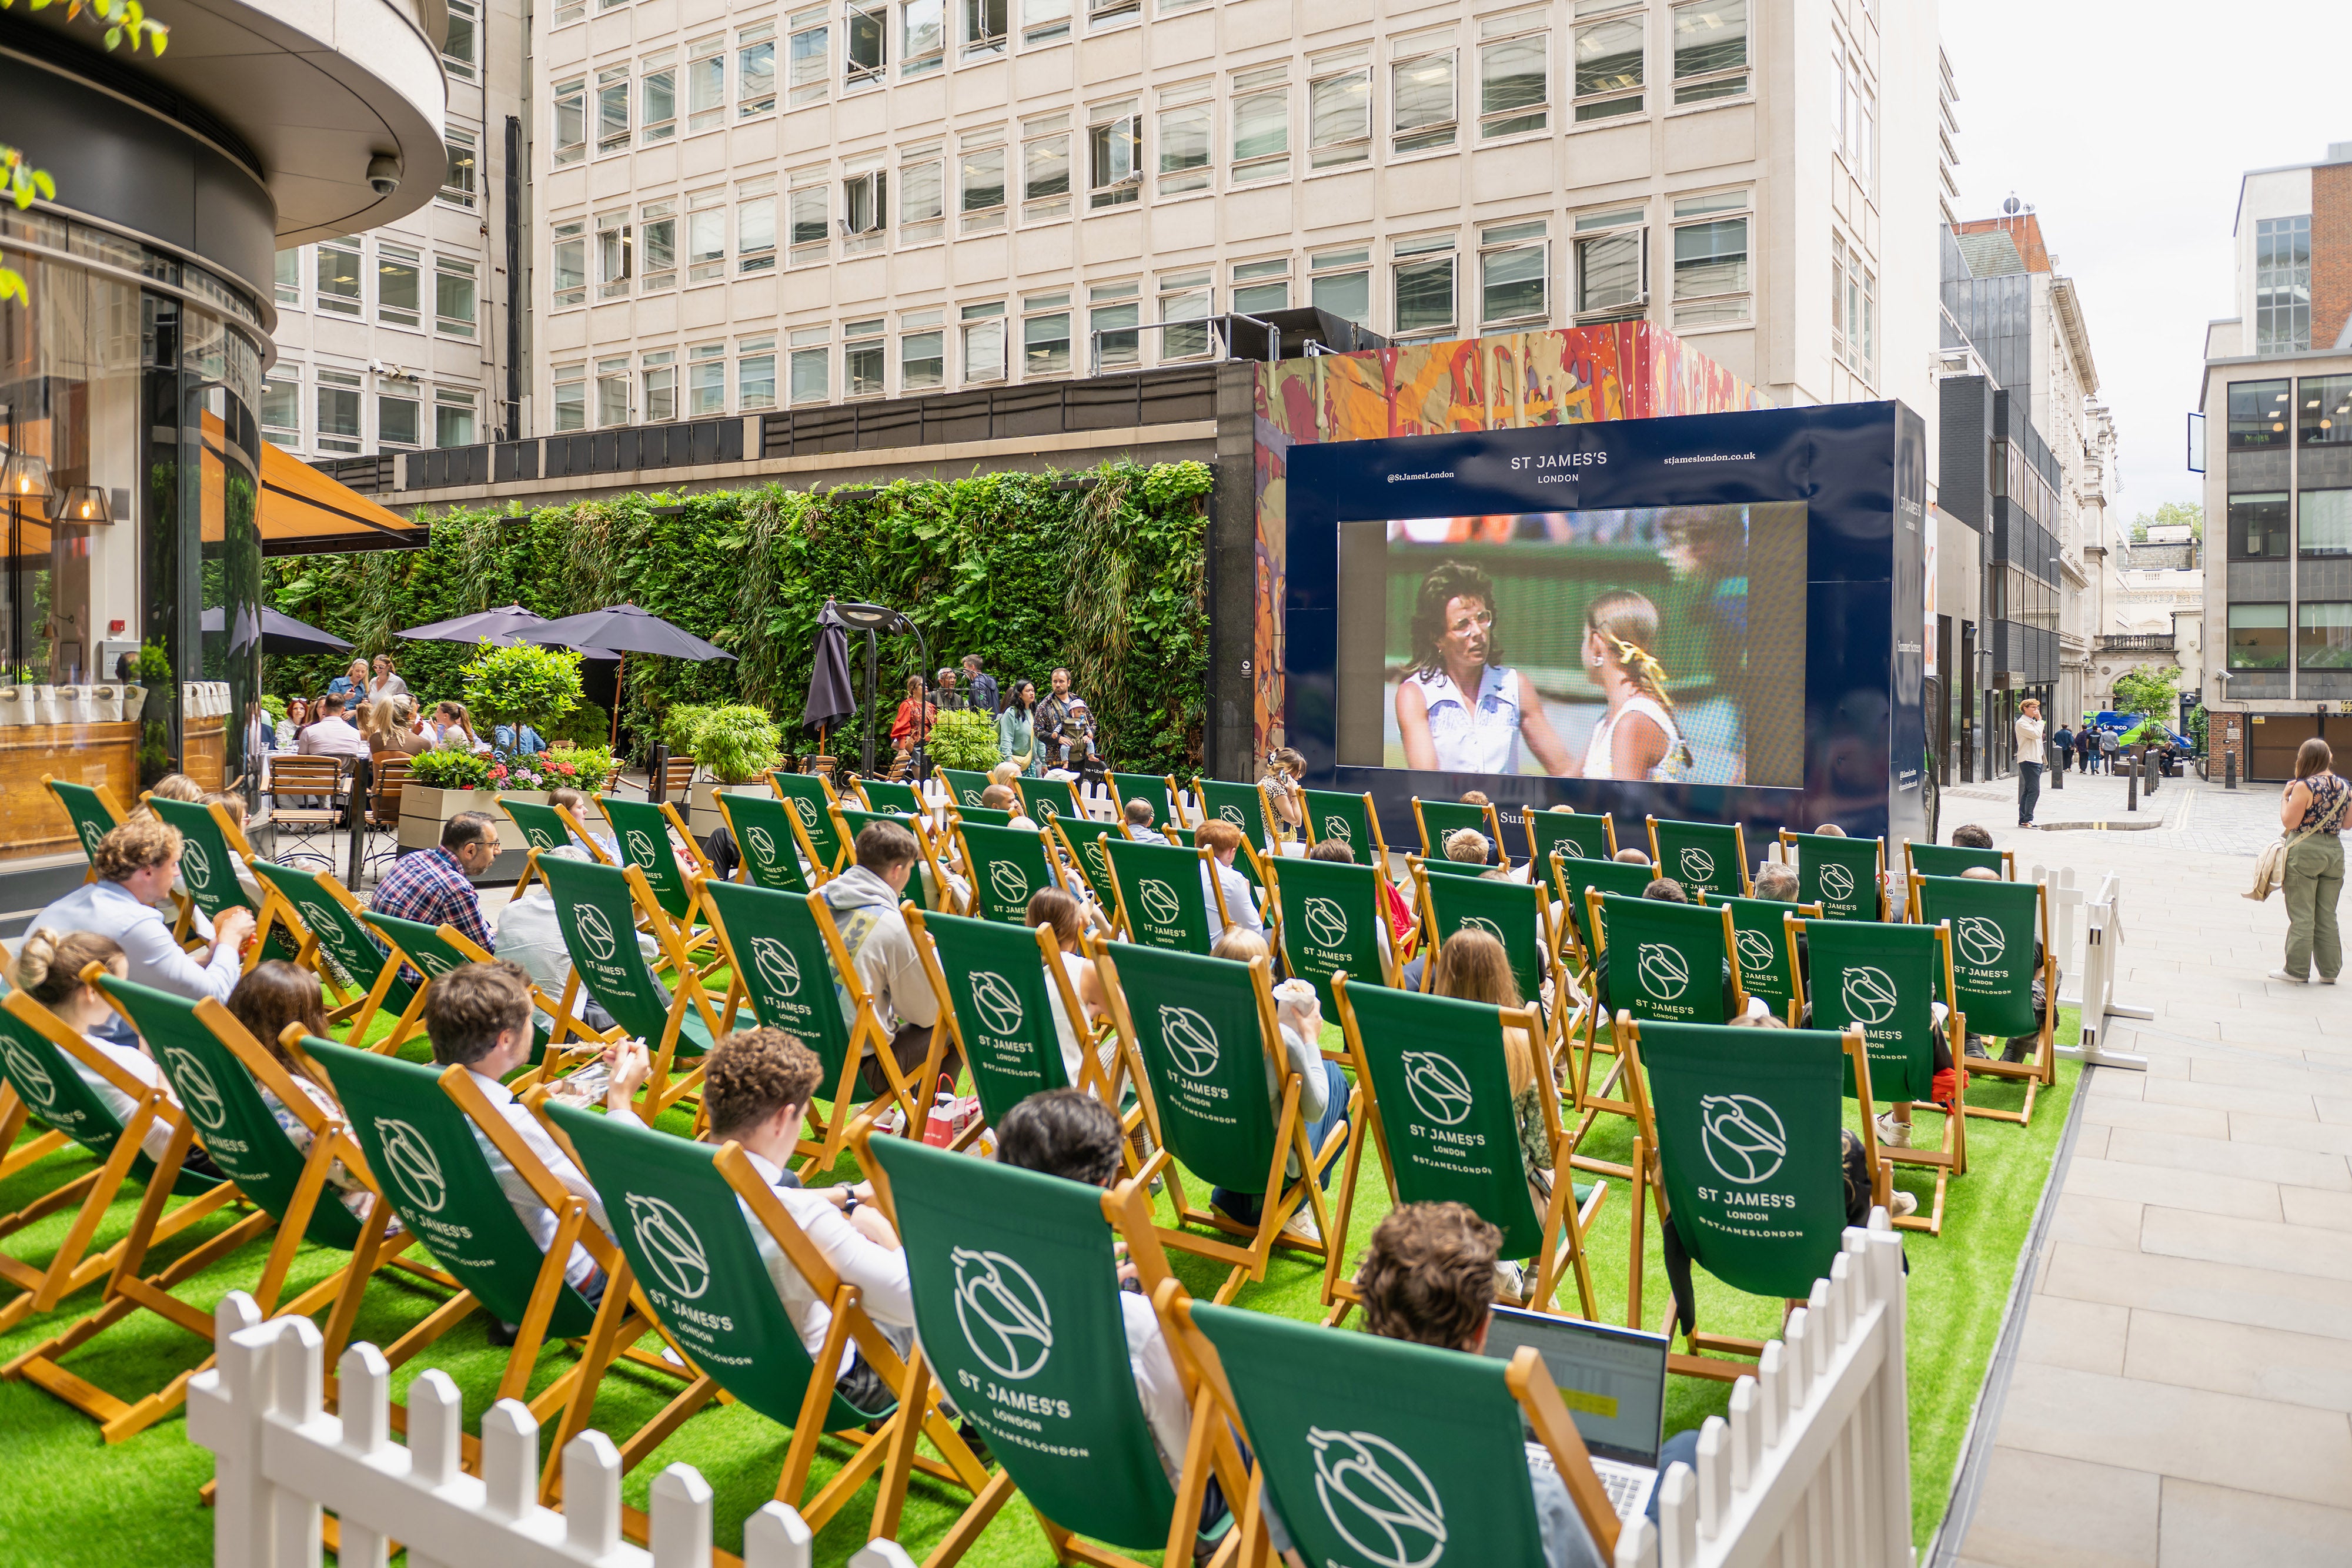 Summer Screens will stay at St James’s Market until 8 September